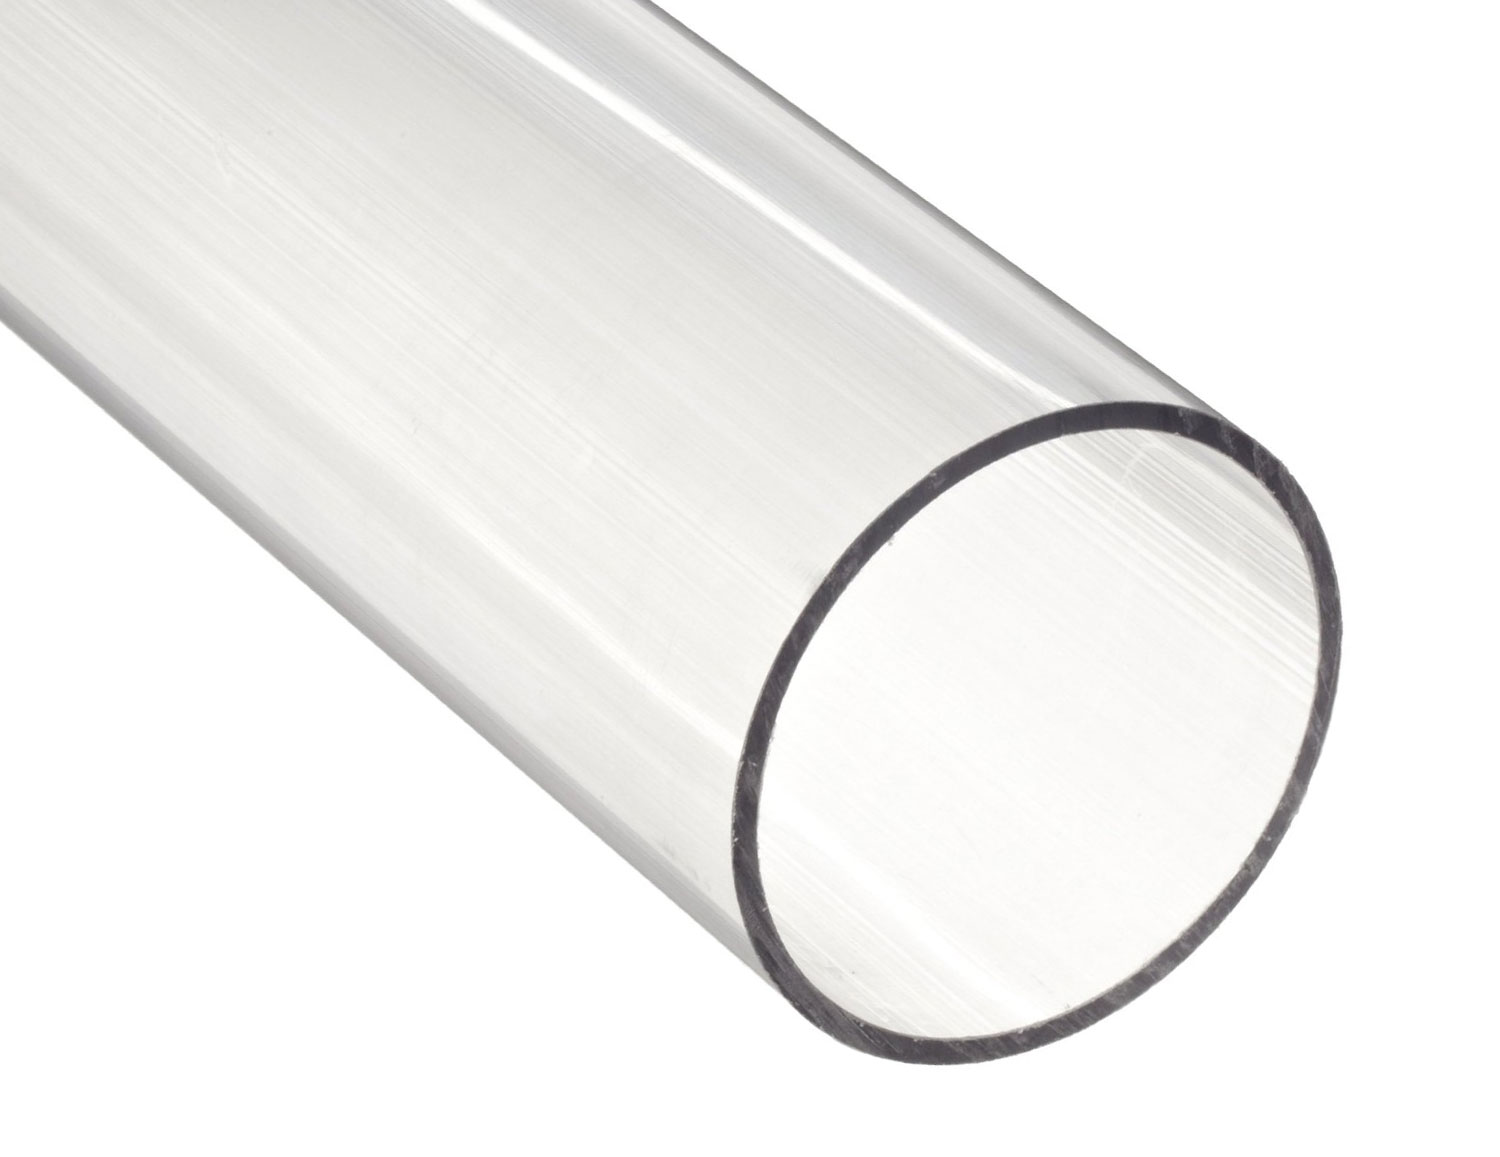 1.875 Polycarbonate Extruded Round Tube 2.00 OD x 1 7/8 ID x 1/16 Wall x 48 Length 2 Units 8 Feet Total 